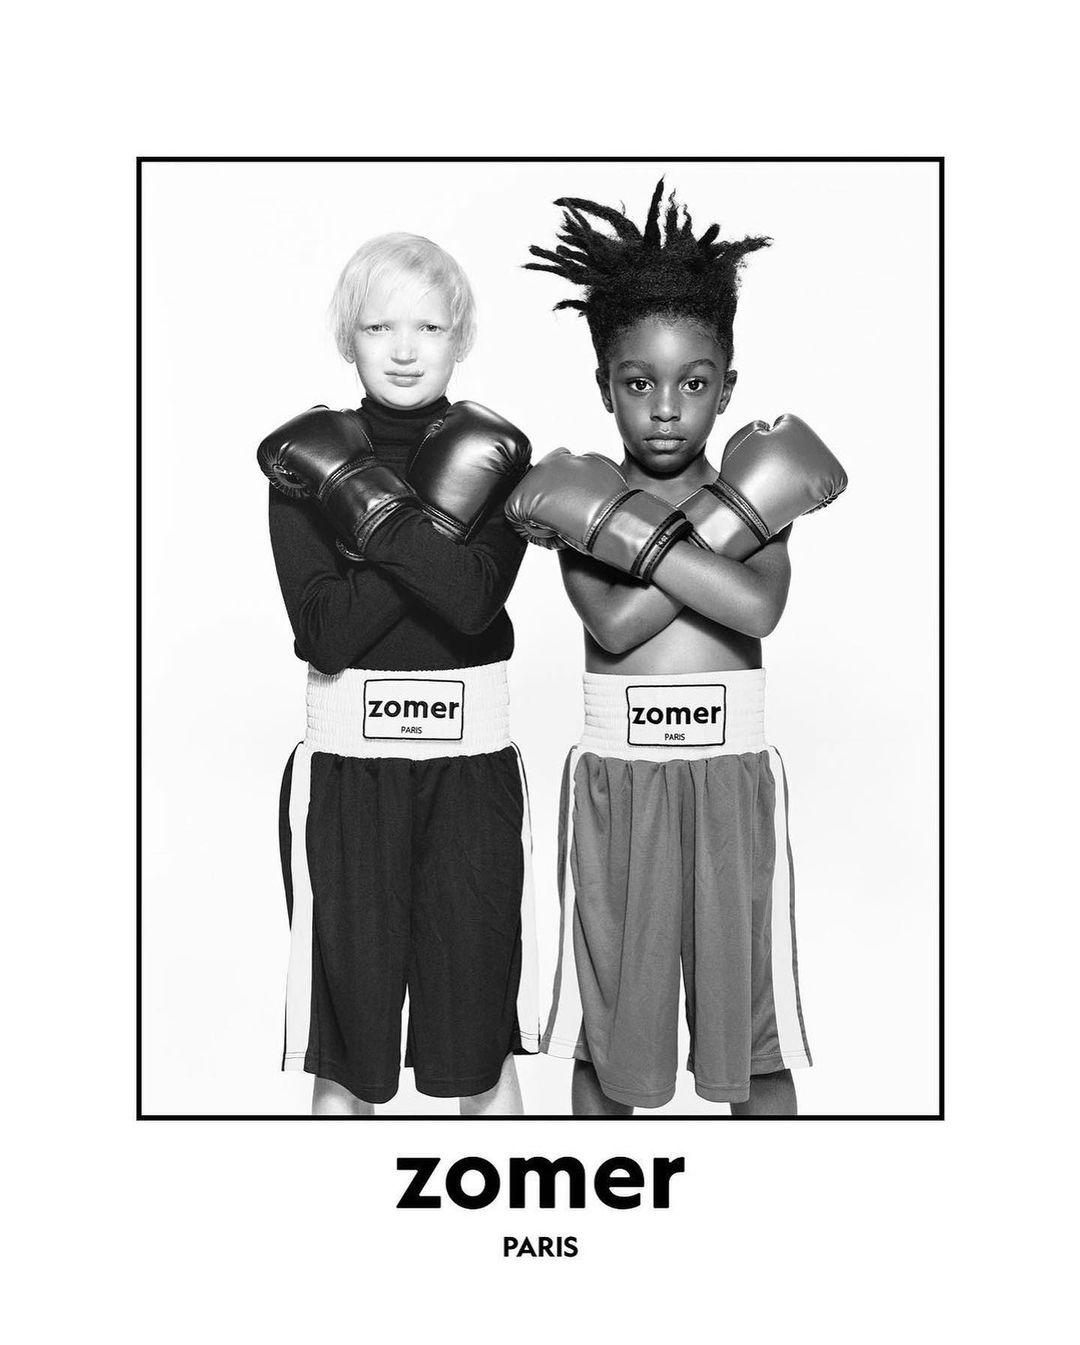 class="content__text"
 “It's Just Kids” – even the world’s biggest fashion stars were babies once. 
These tiny industry insiders are the first to take a look at the @zomer.official ’s collection – a womenswear brand with a strong focus on craftsmanship, the art of dressing, and the joy found in creative expression. 

zomer is a collaborative effort by designer @danial.aitouganov.0.2 , supported by stylist @imruh . 
The brand’s debut show is scheduled on September 26th during Paris fashion week. 

photographer &amp; director @oliverhadleepearch@artpartner 
stylist @imruh 
hair @soichiinagaki@artpatner 
make up @siddharthasimone@streetersagency 
casting @peoplefile 
production @block.productions@rachael.evans_ 
partner @eccoleather 
stills post-production @aly.studio@hammerlab 

video production @50mm.amsterdam@naomyneonijoanny@4everjules__ 
dop @pimpimentel 
creative post production @eliasbrugs 
vfx @semleuven 
model @sterre.h@premiermodels 

special thanks @mojospoodleclub@bambi_paradise